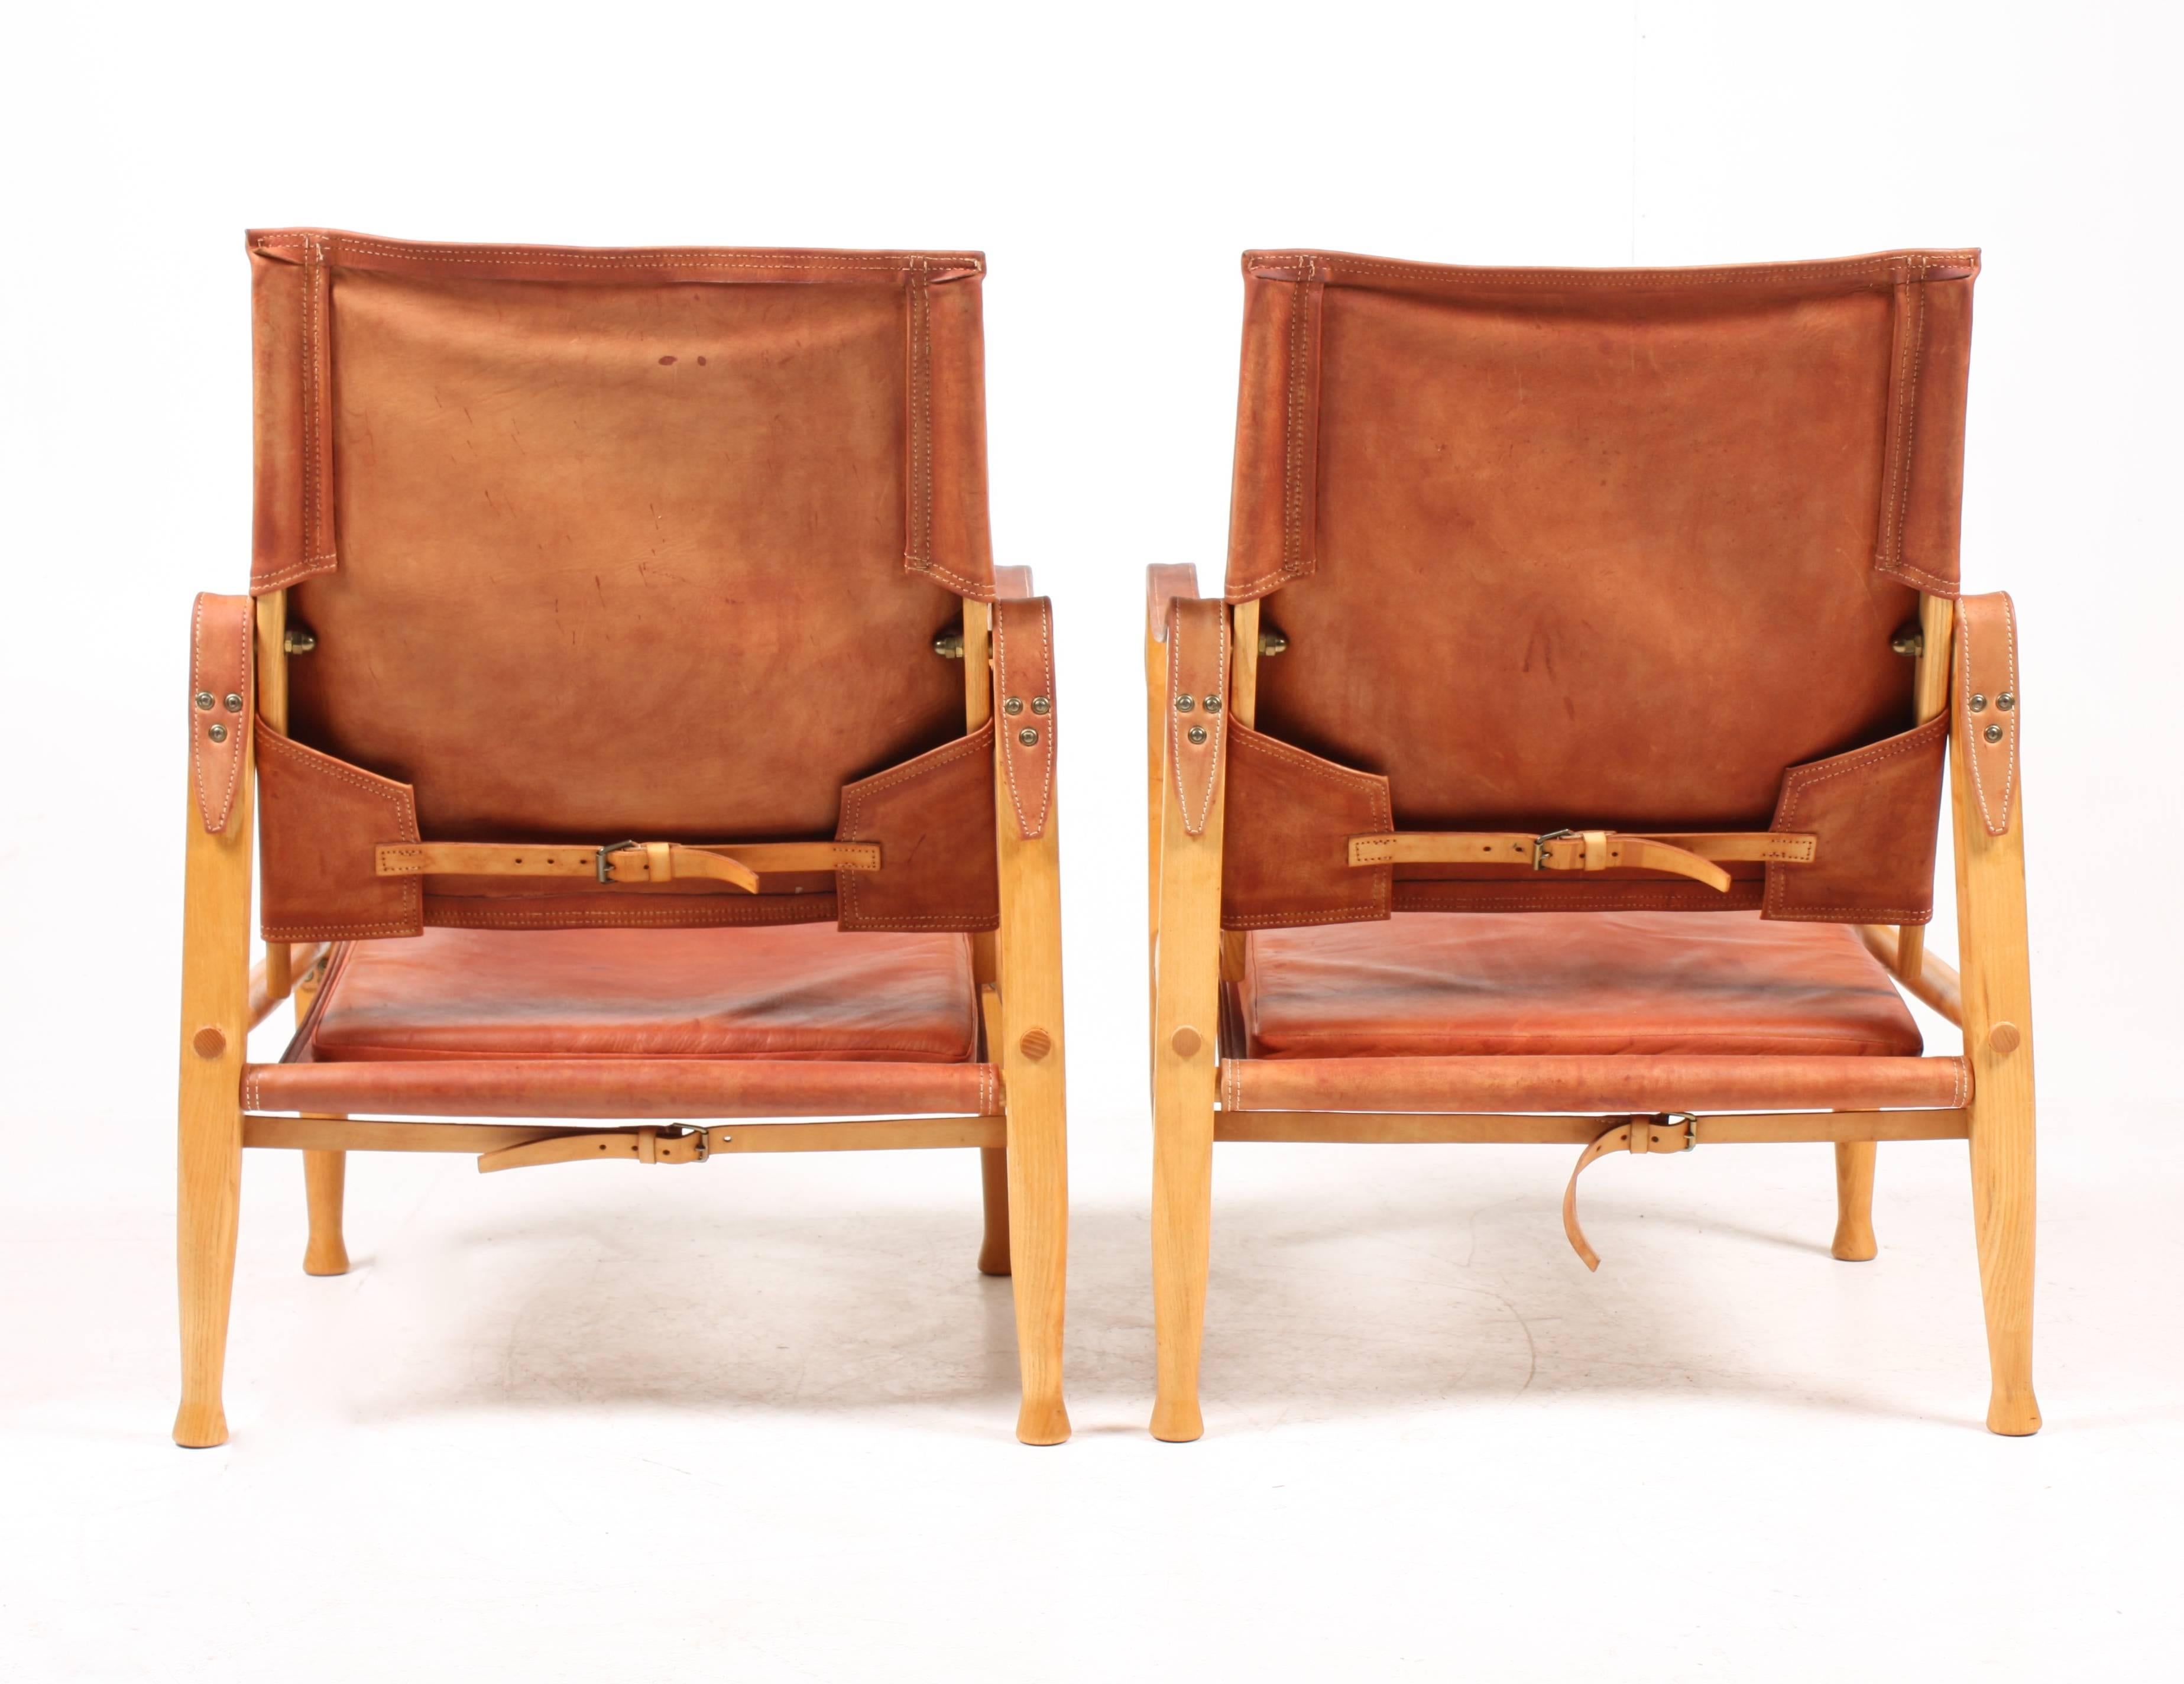 Pair of safari chairs in elm and well patinated reddish leather designed by Maa. Kaare Klint for Rud Rasmussen cabinetmakers in 1933. This pair is from the 1960s. Made in Denmark. Great original condition.